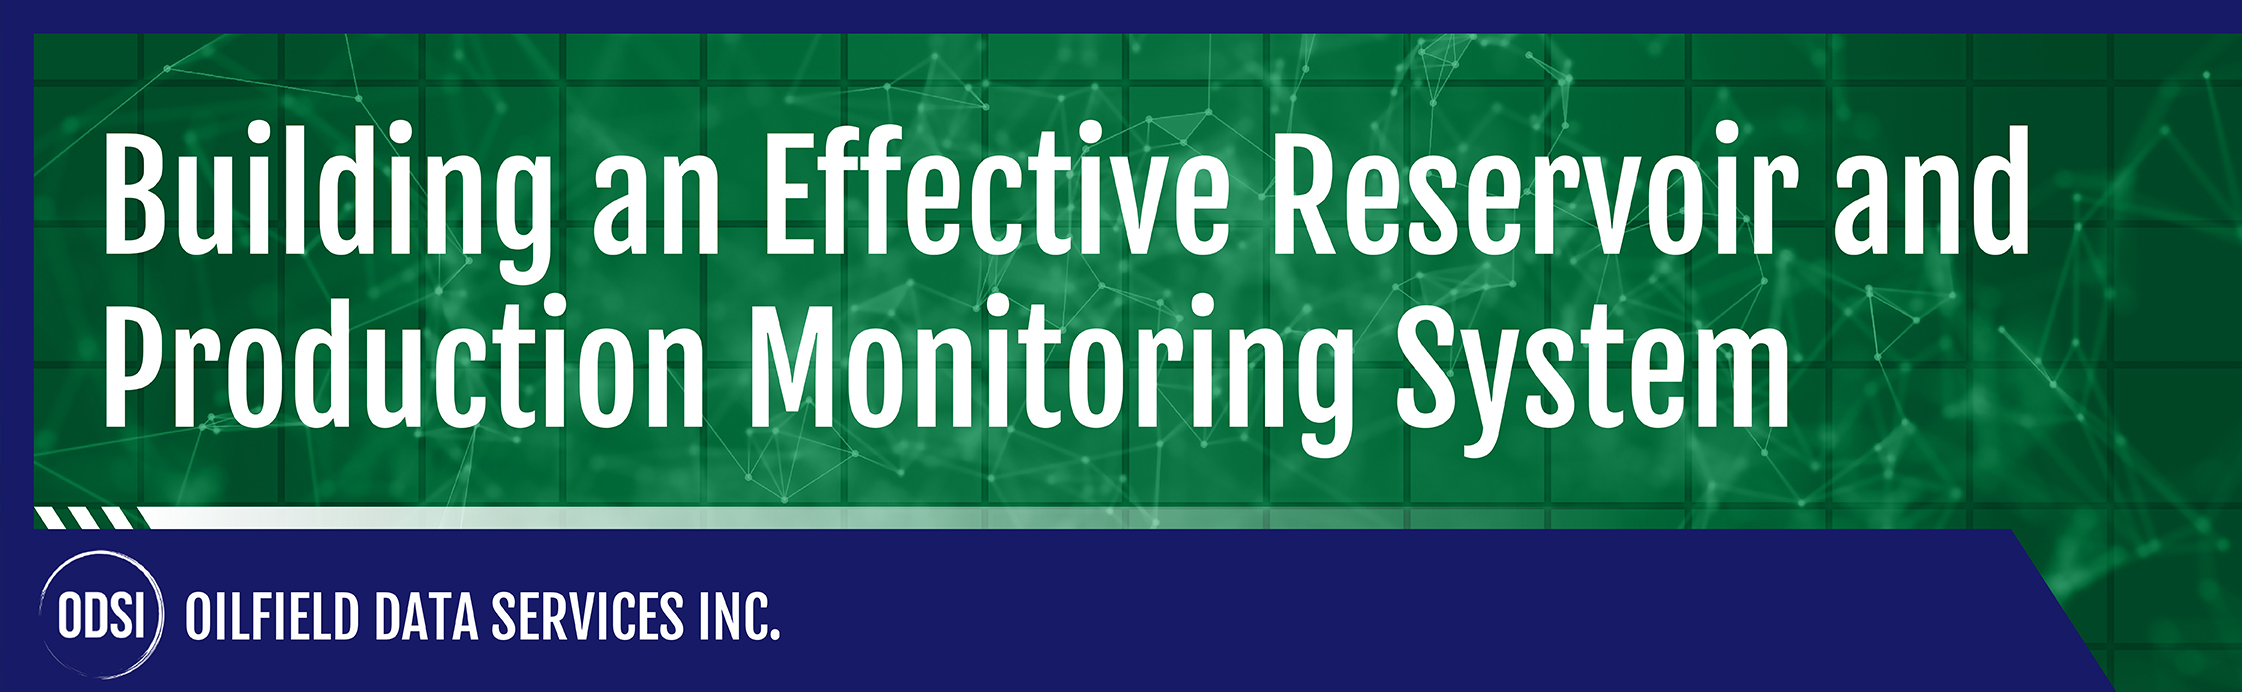 Building an effective reservoir monitoring system